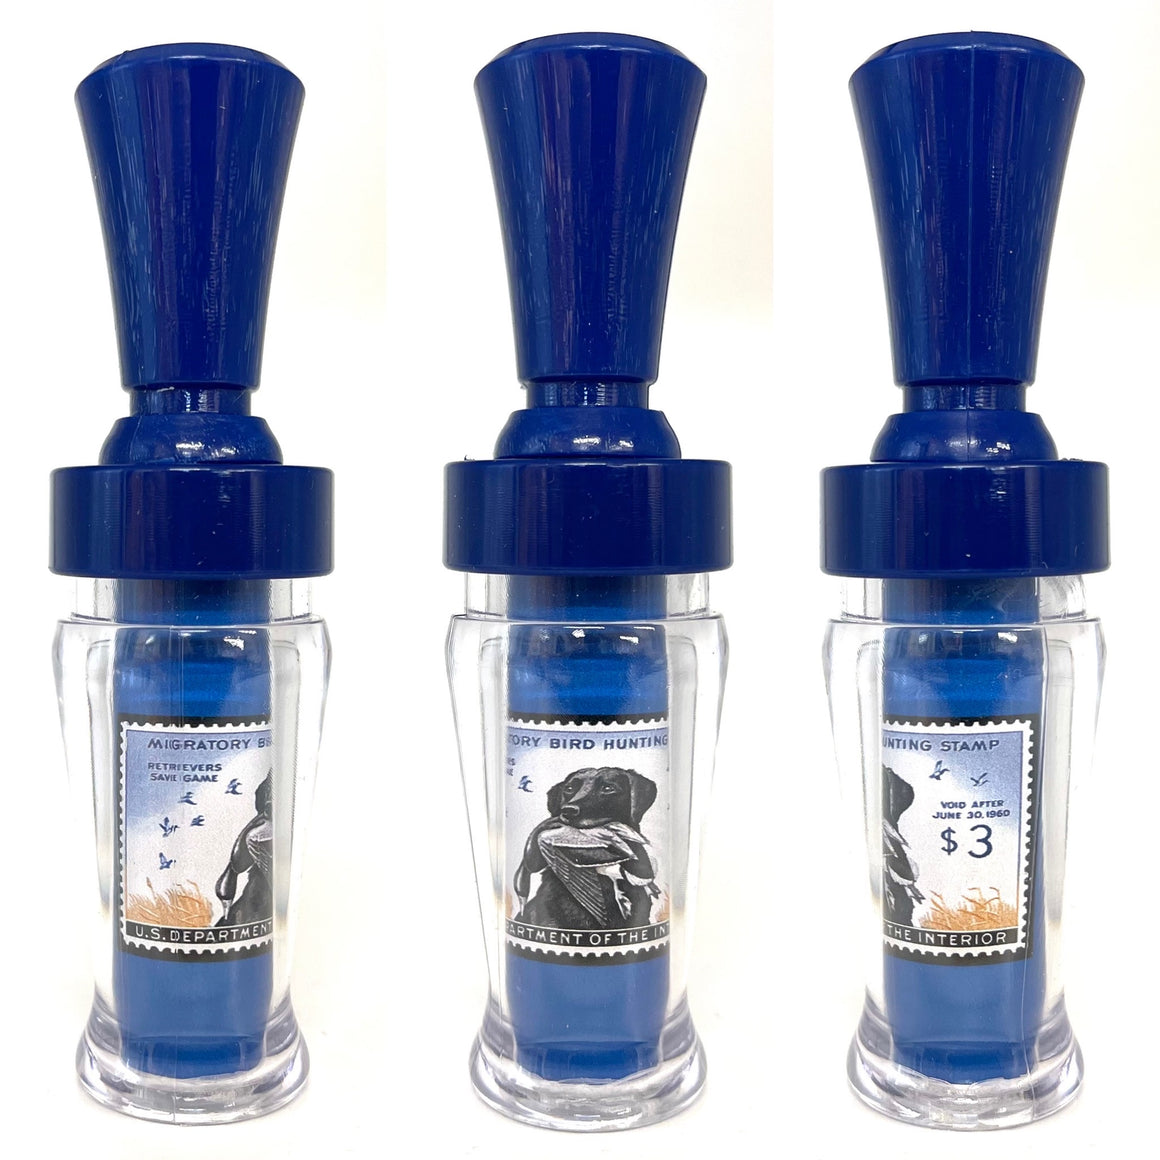 POLYCARBONATE IMAGE DUCK CALL 1960 STAMP